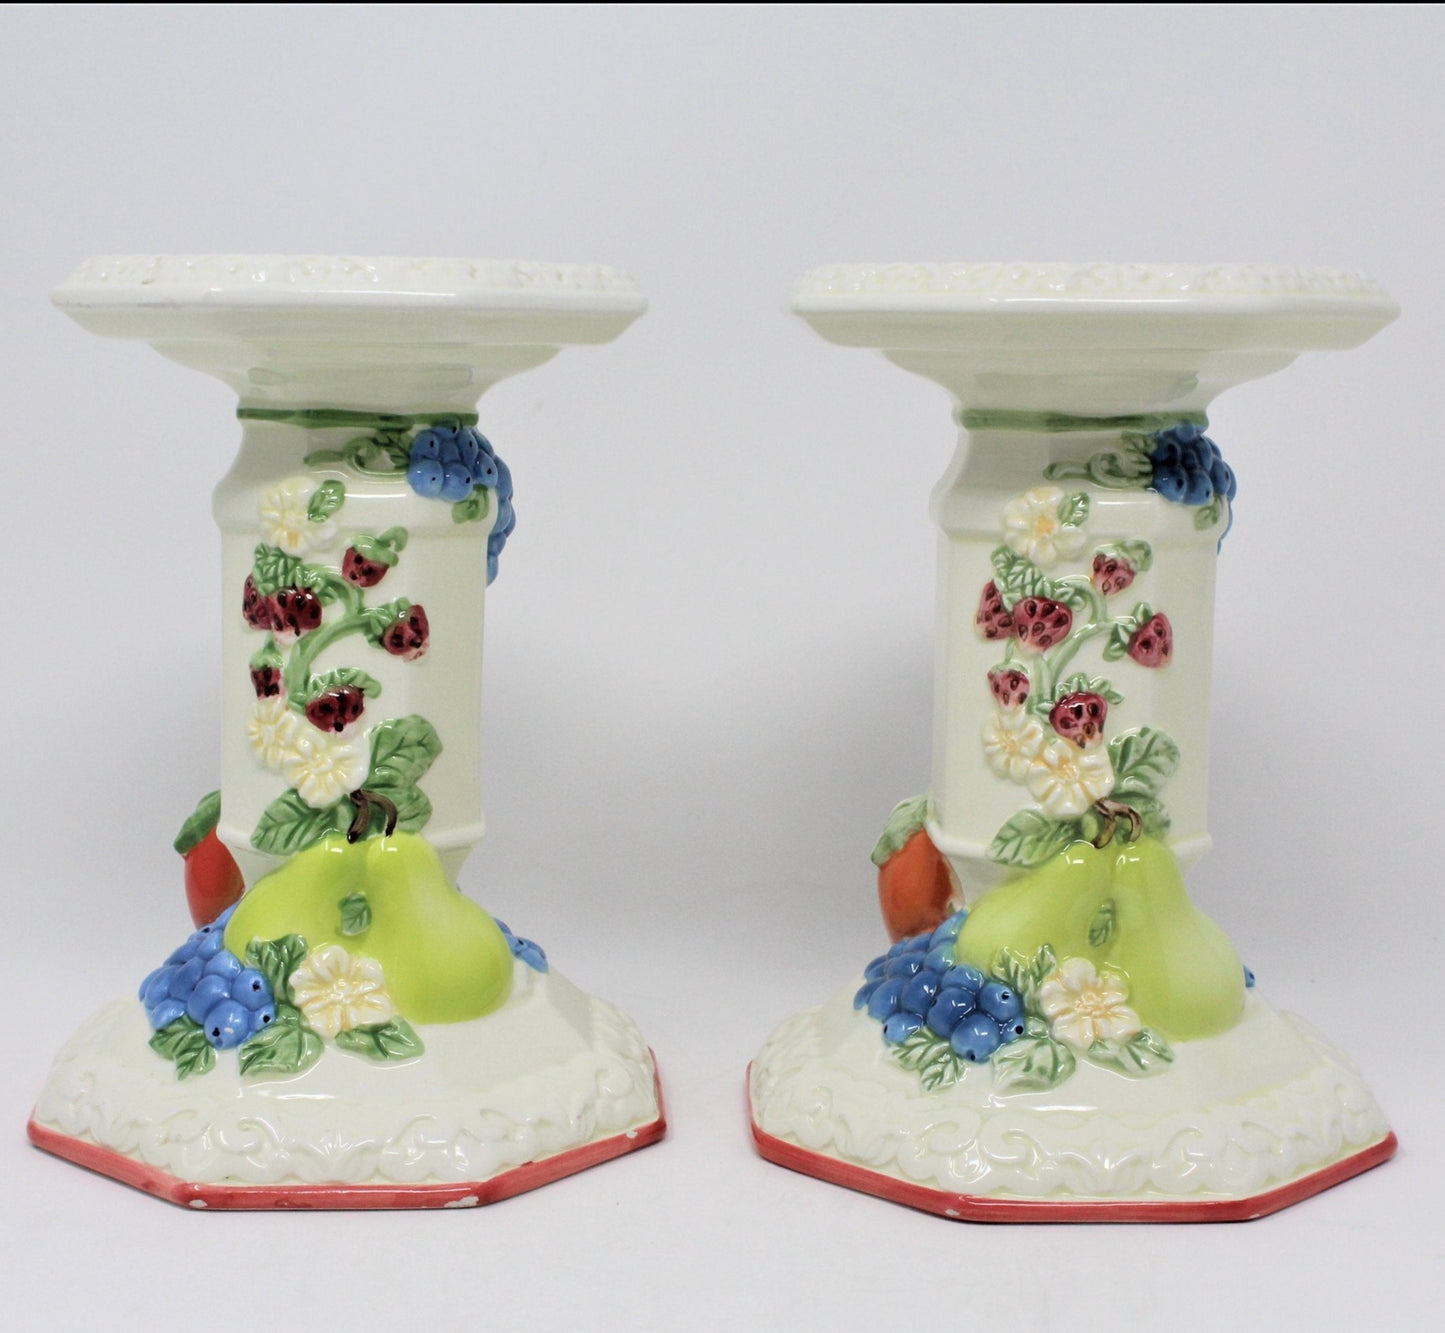 Candle Holders, Avon, Sweet Country Harvest, Set of 2, Ceramic